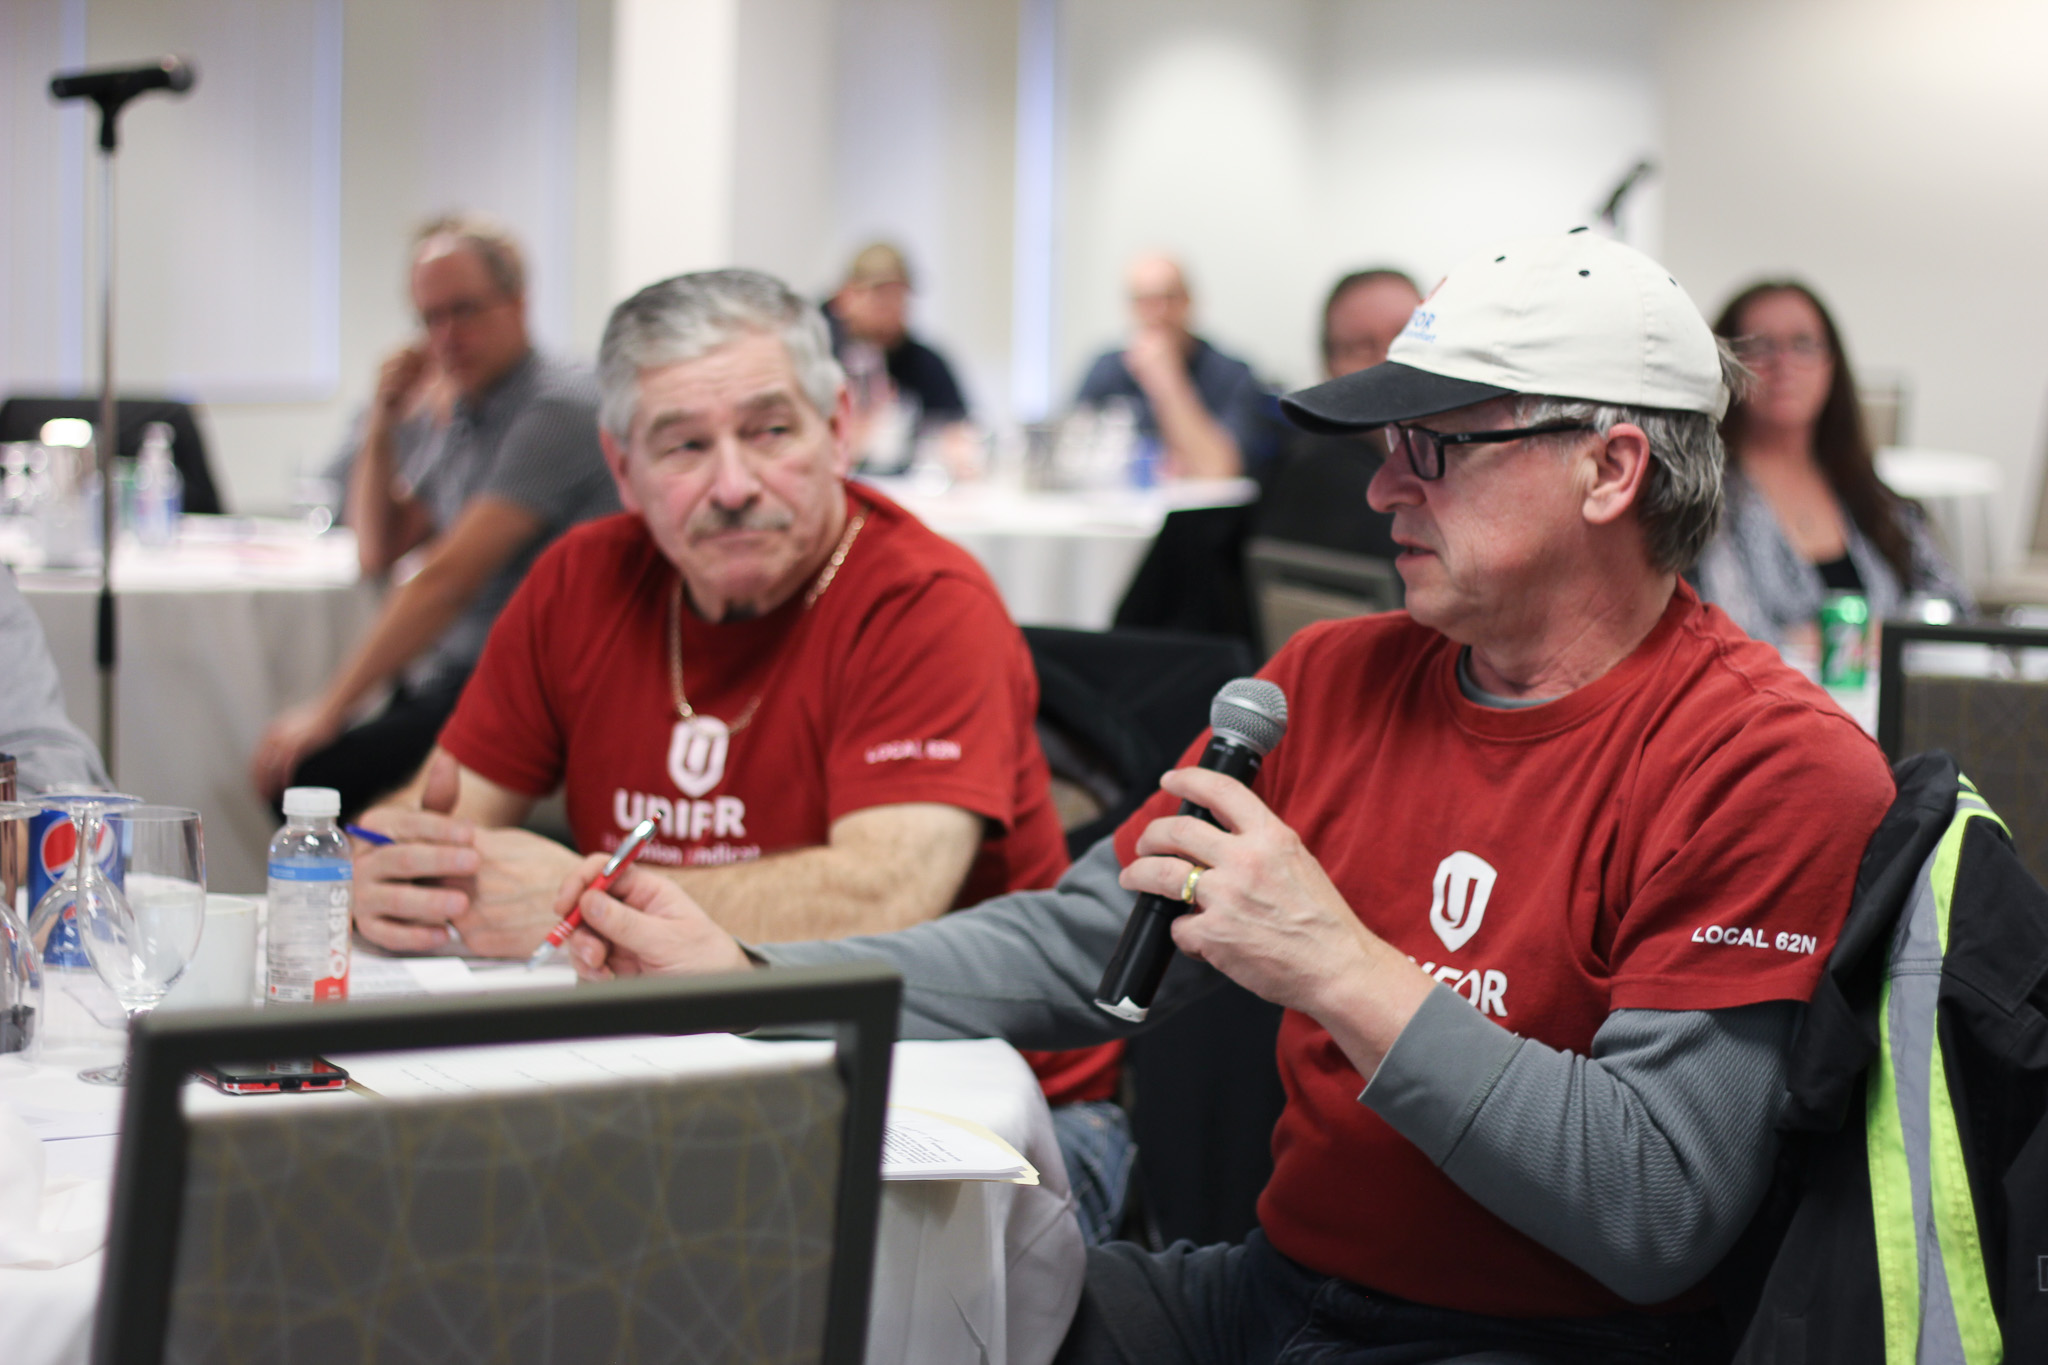 Two men sitting at a table wearing red Unifor tshirts, one is holding a mic and wearing a ballcap 